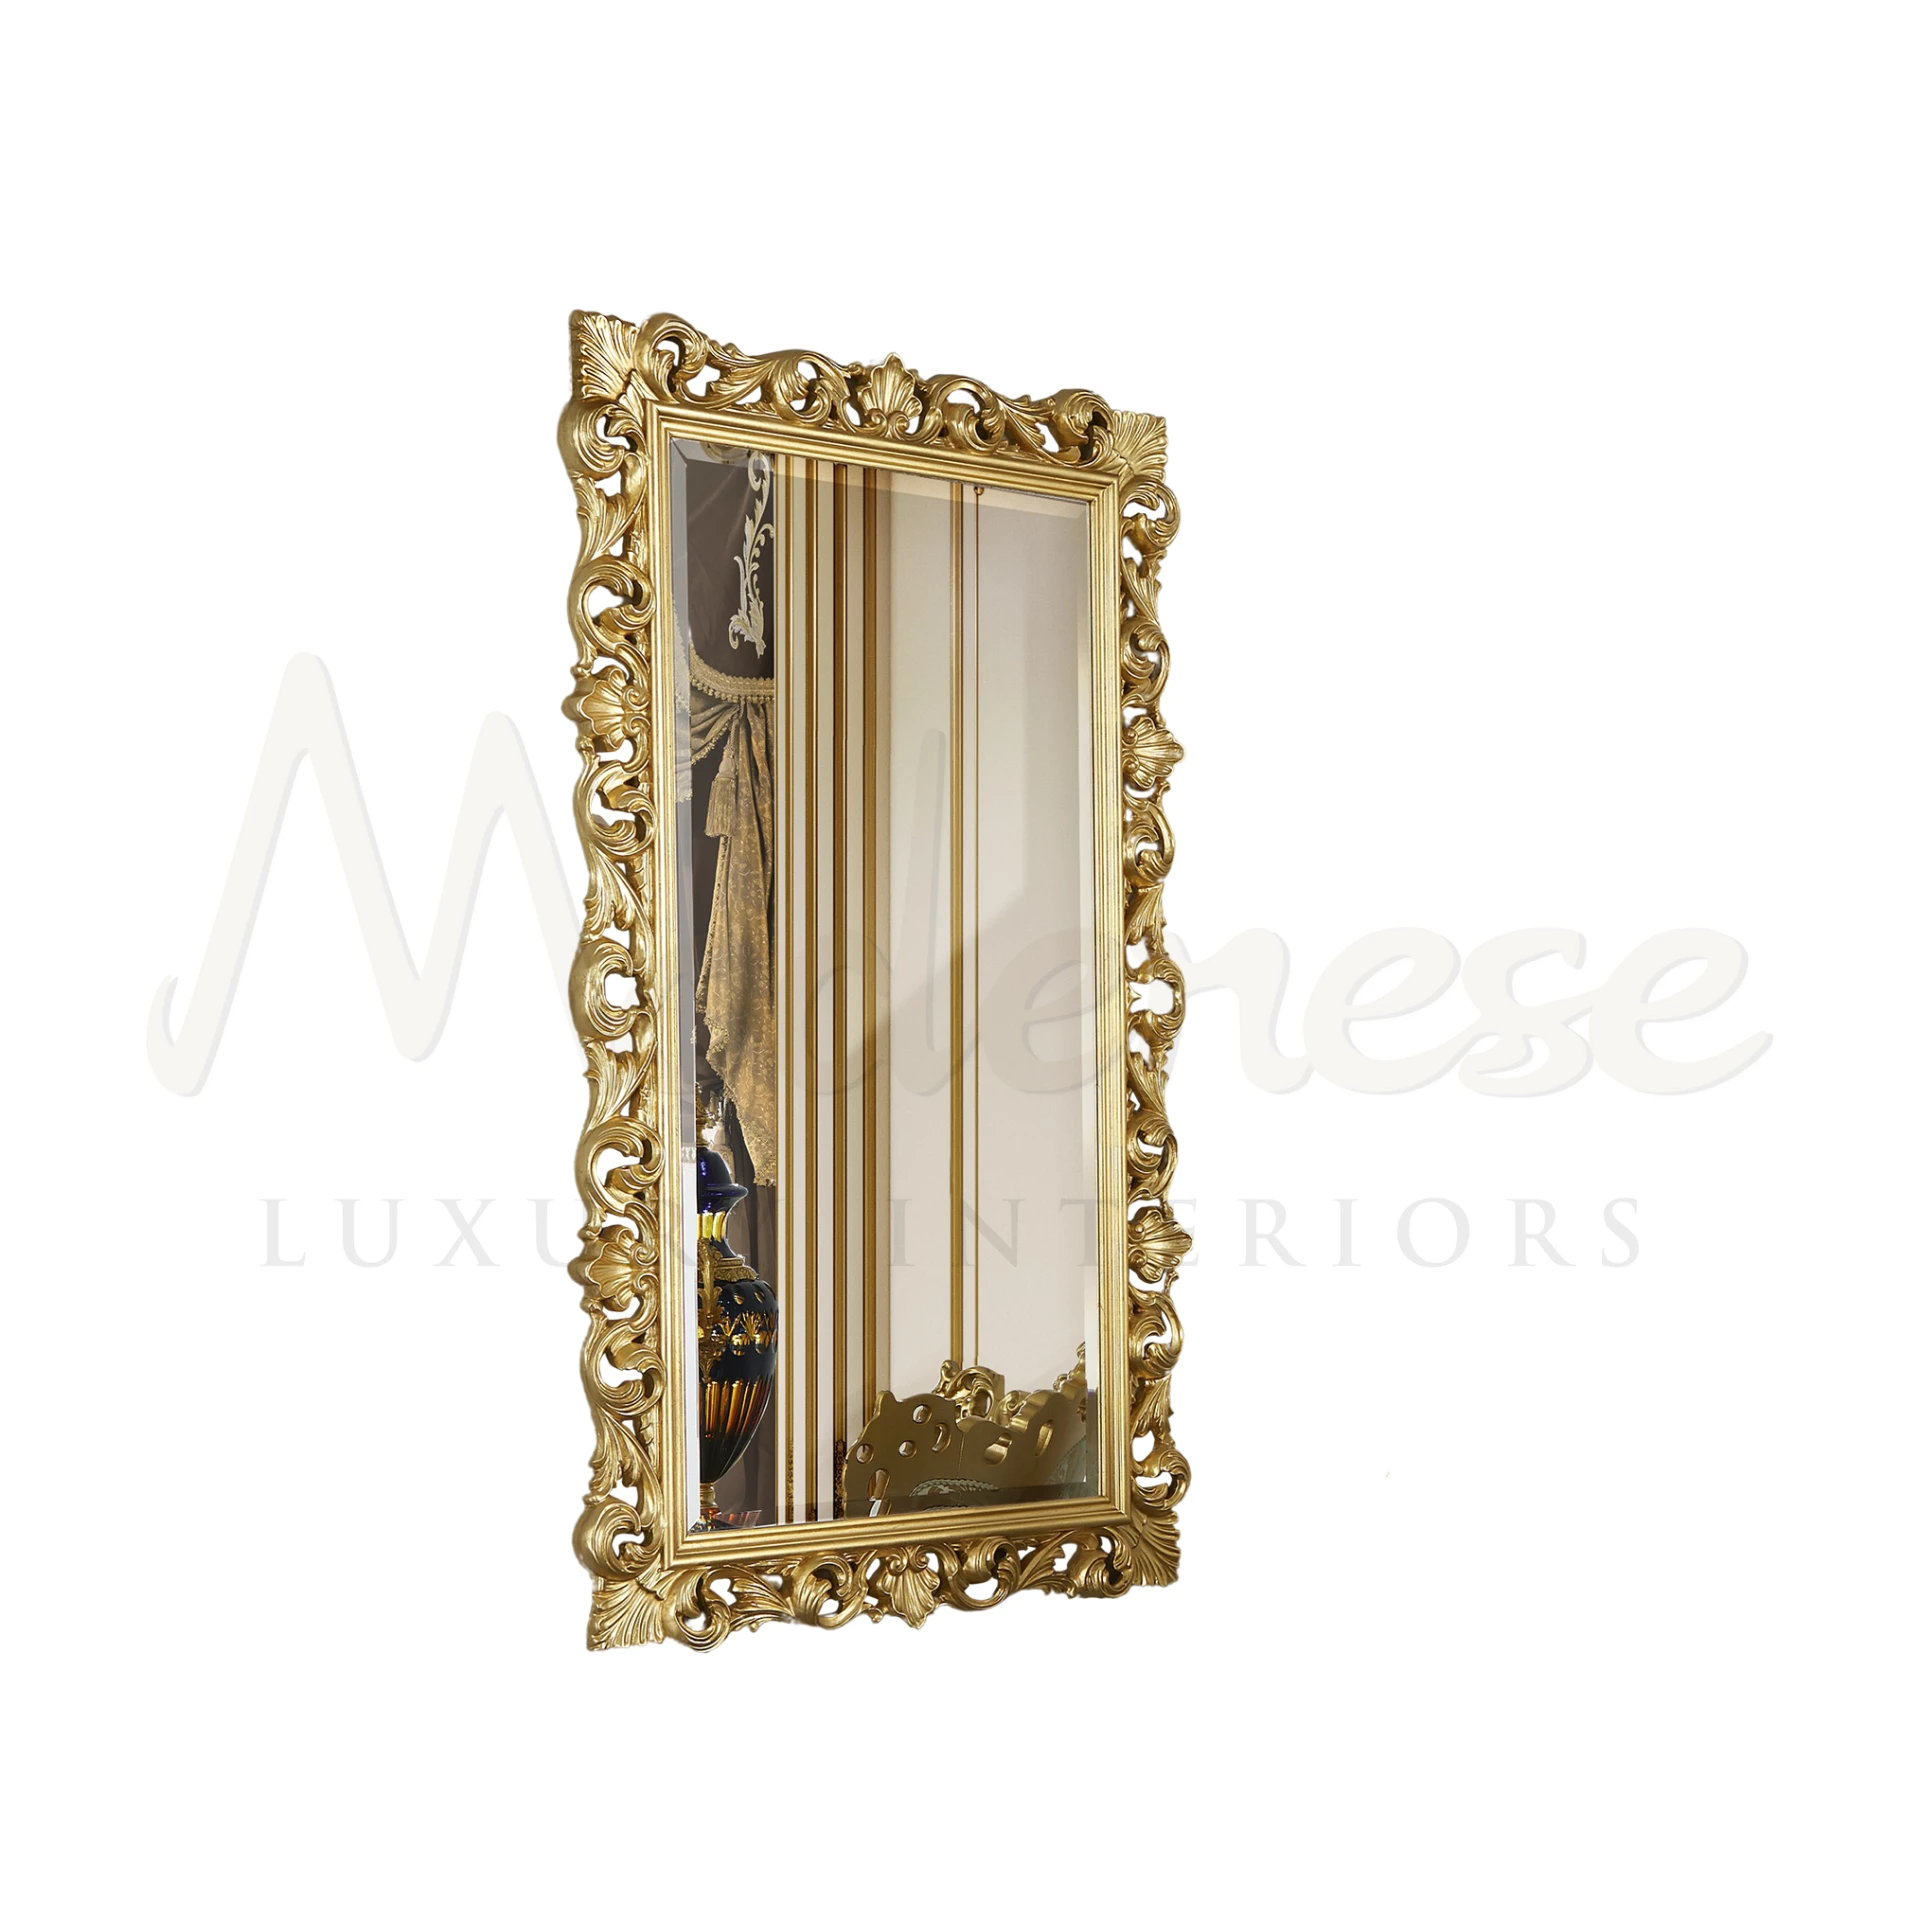 Classic Noble Figured Mirror, a custom-made square piece with gold leaf framing, offers timeless elegance for luxury interior design.